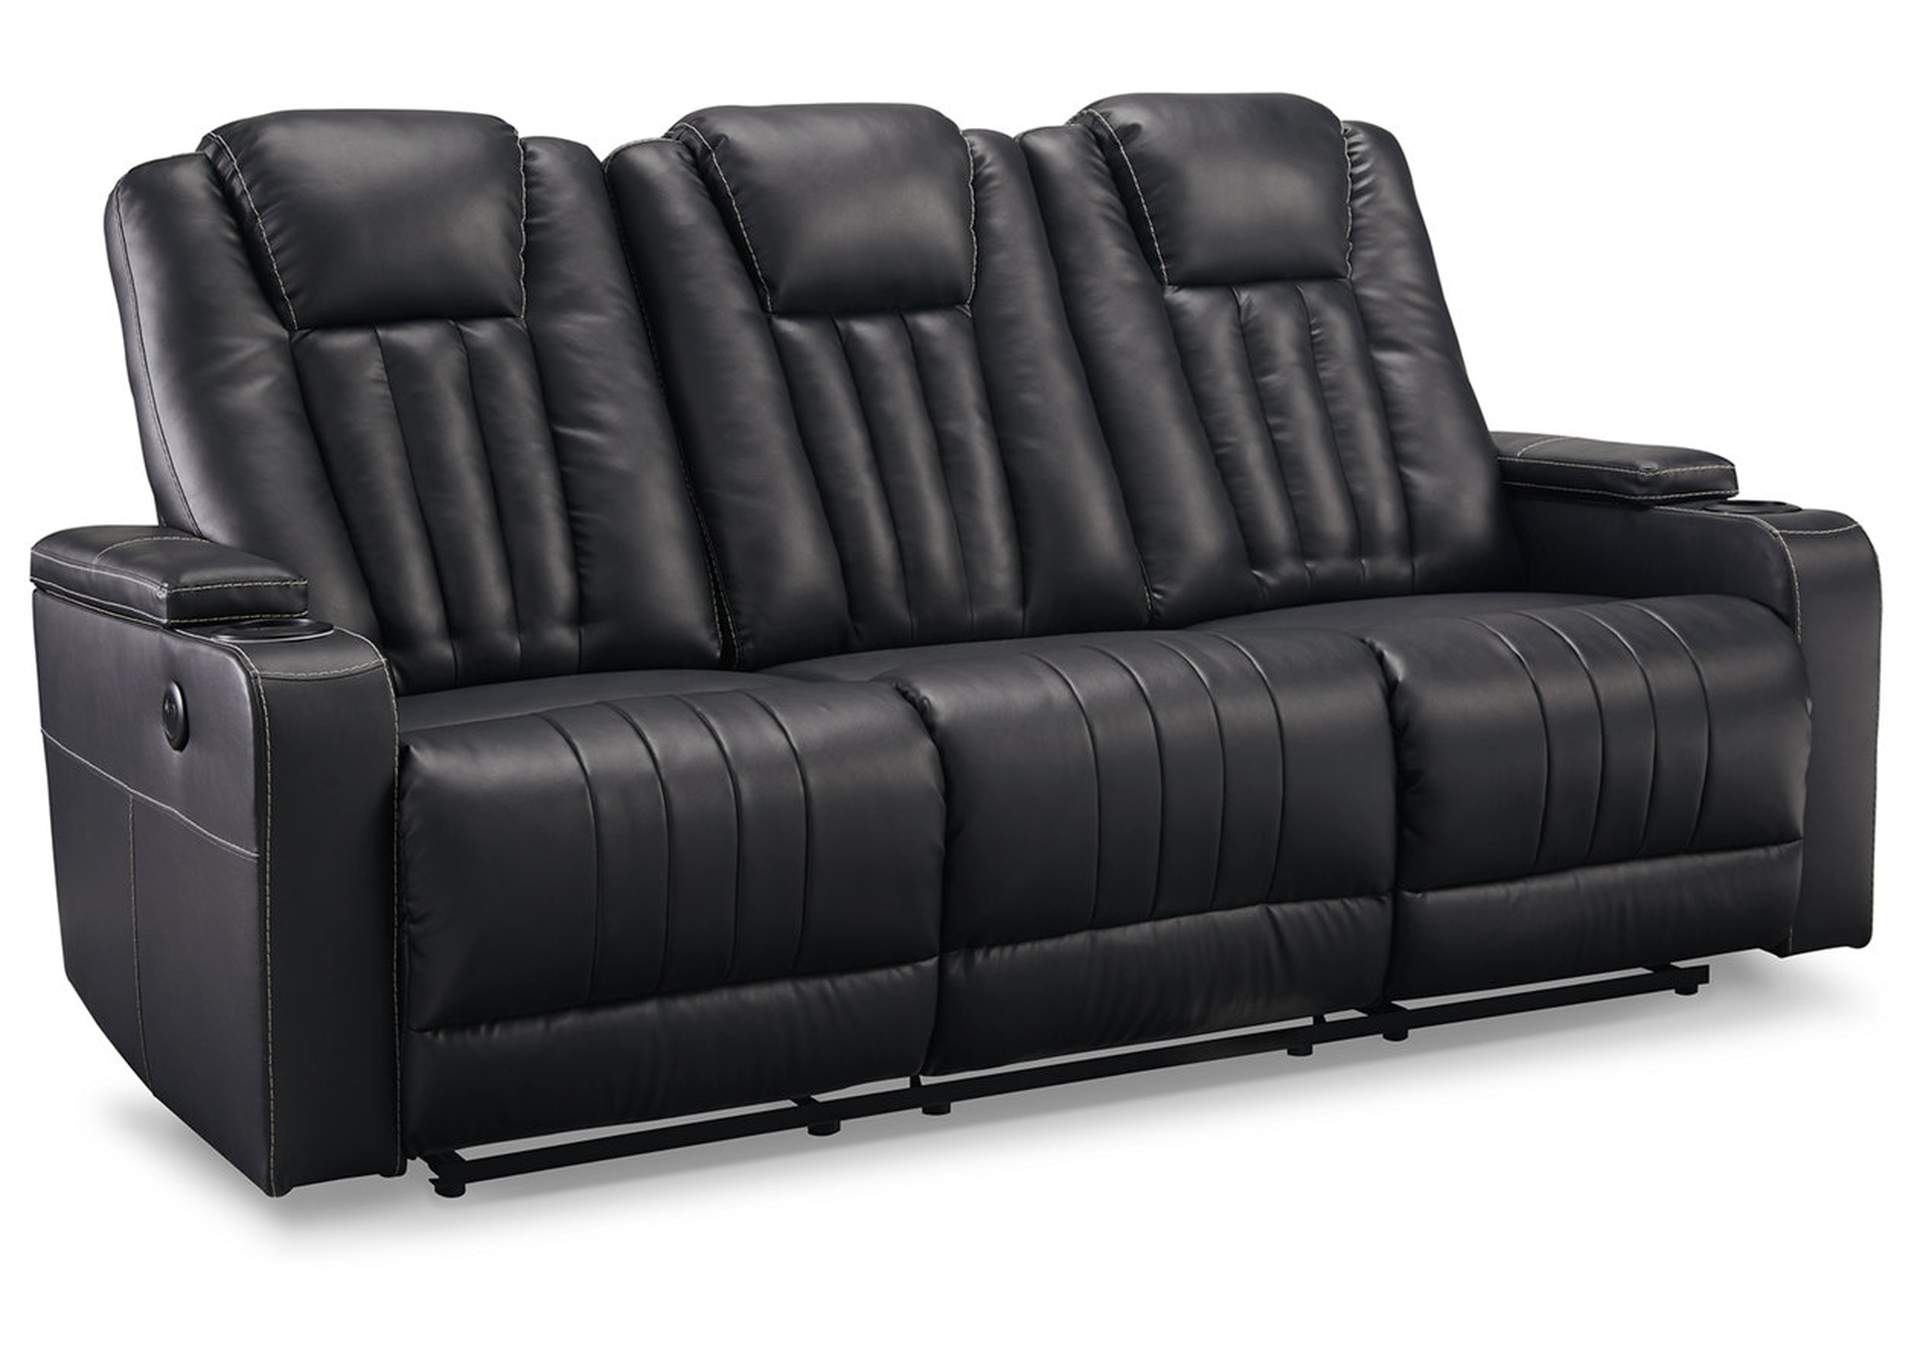 Center Point Reclining Sofa with Drop Down Table,Signature Design By Ashley